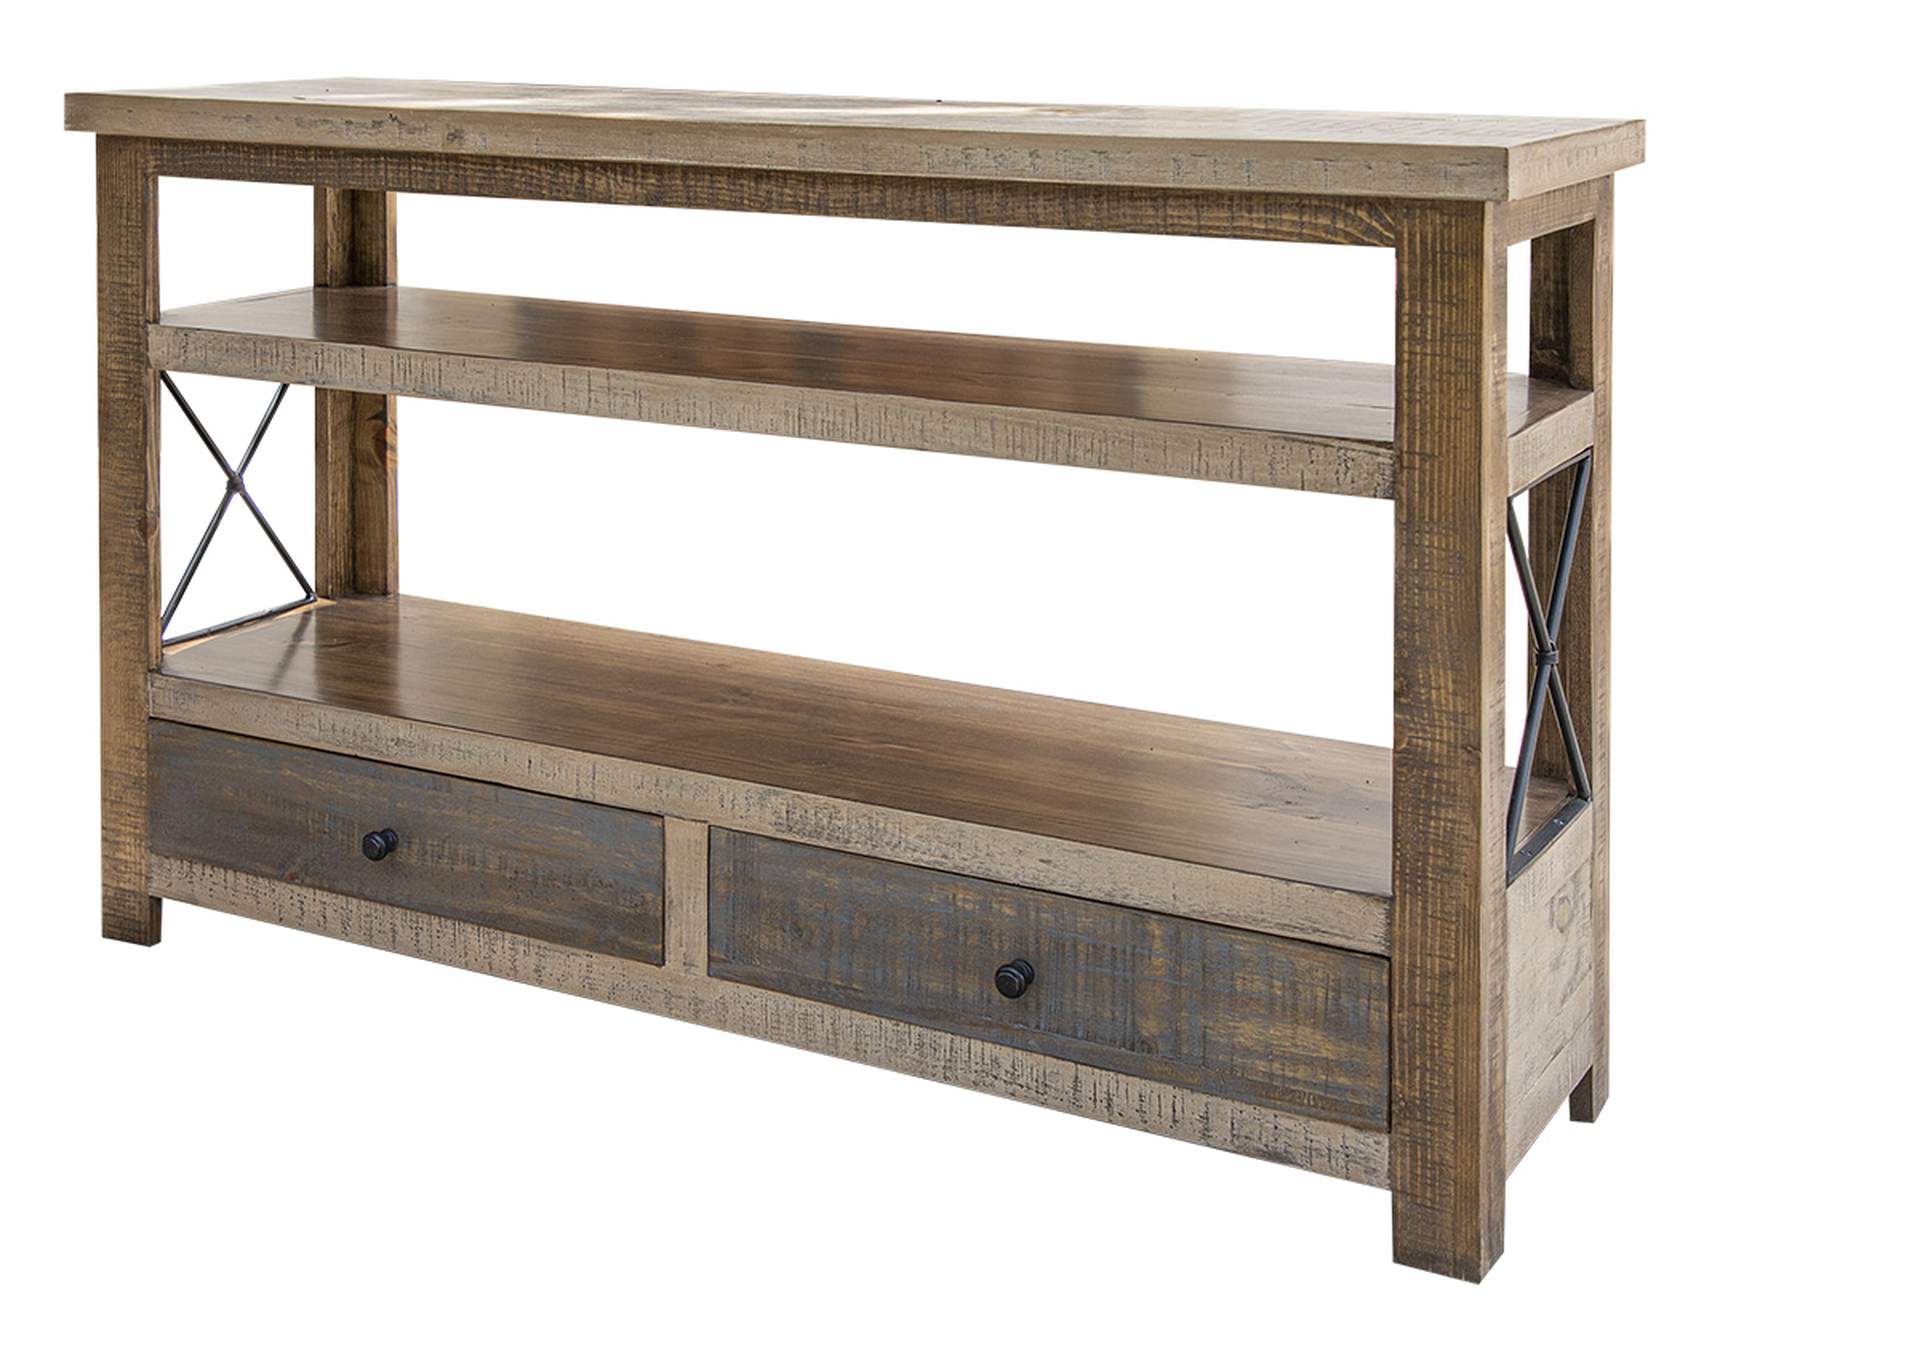 Andaluz 2 Drawers Sofa Table,International Furniture Direct